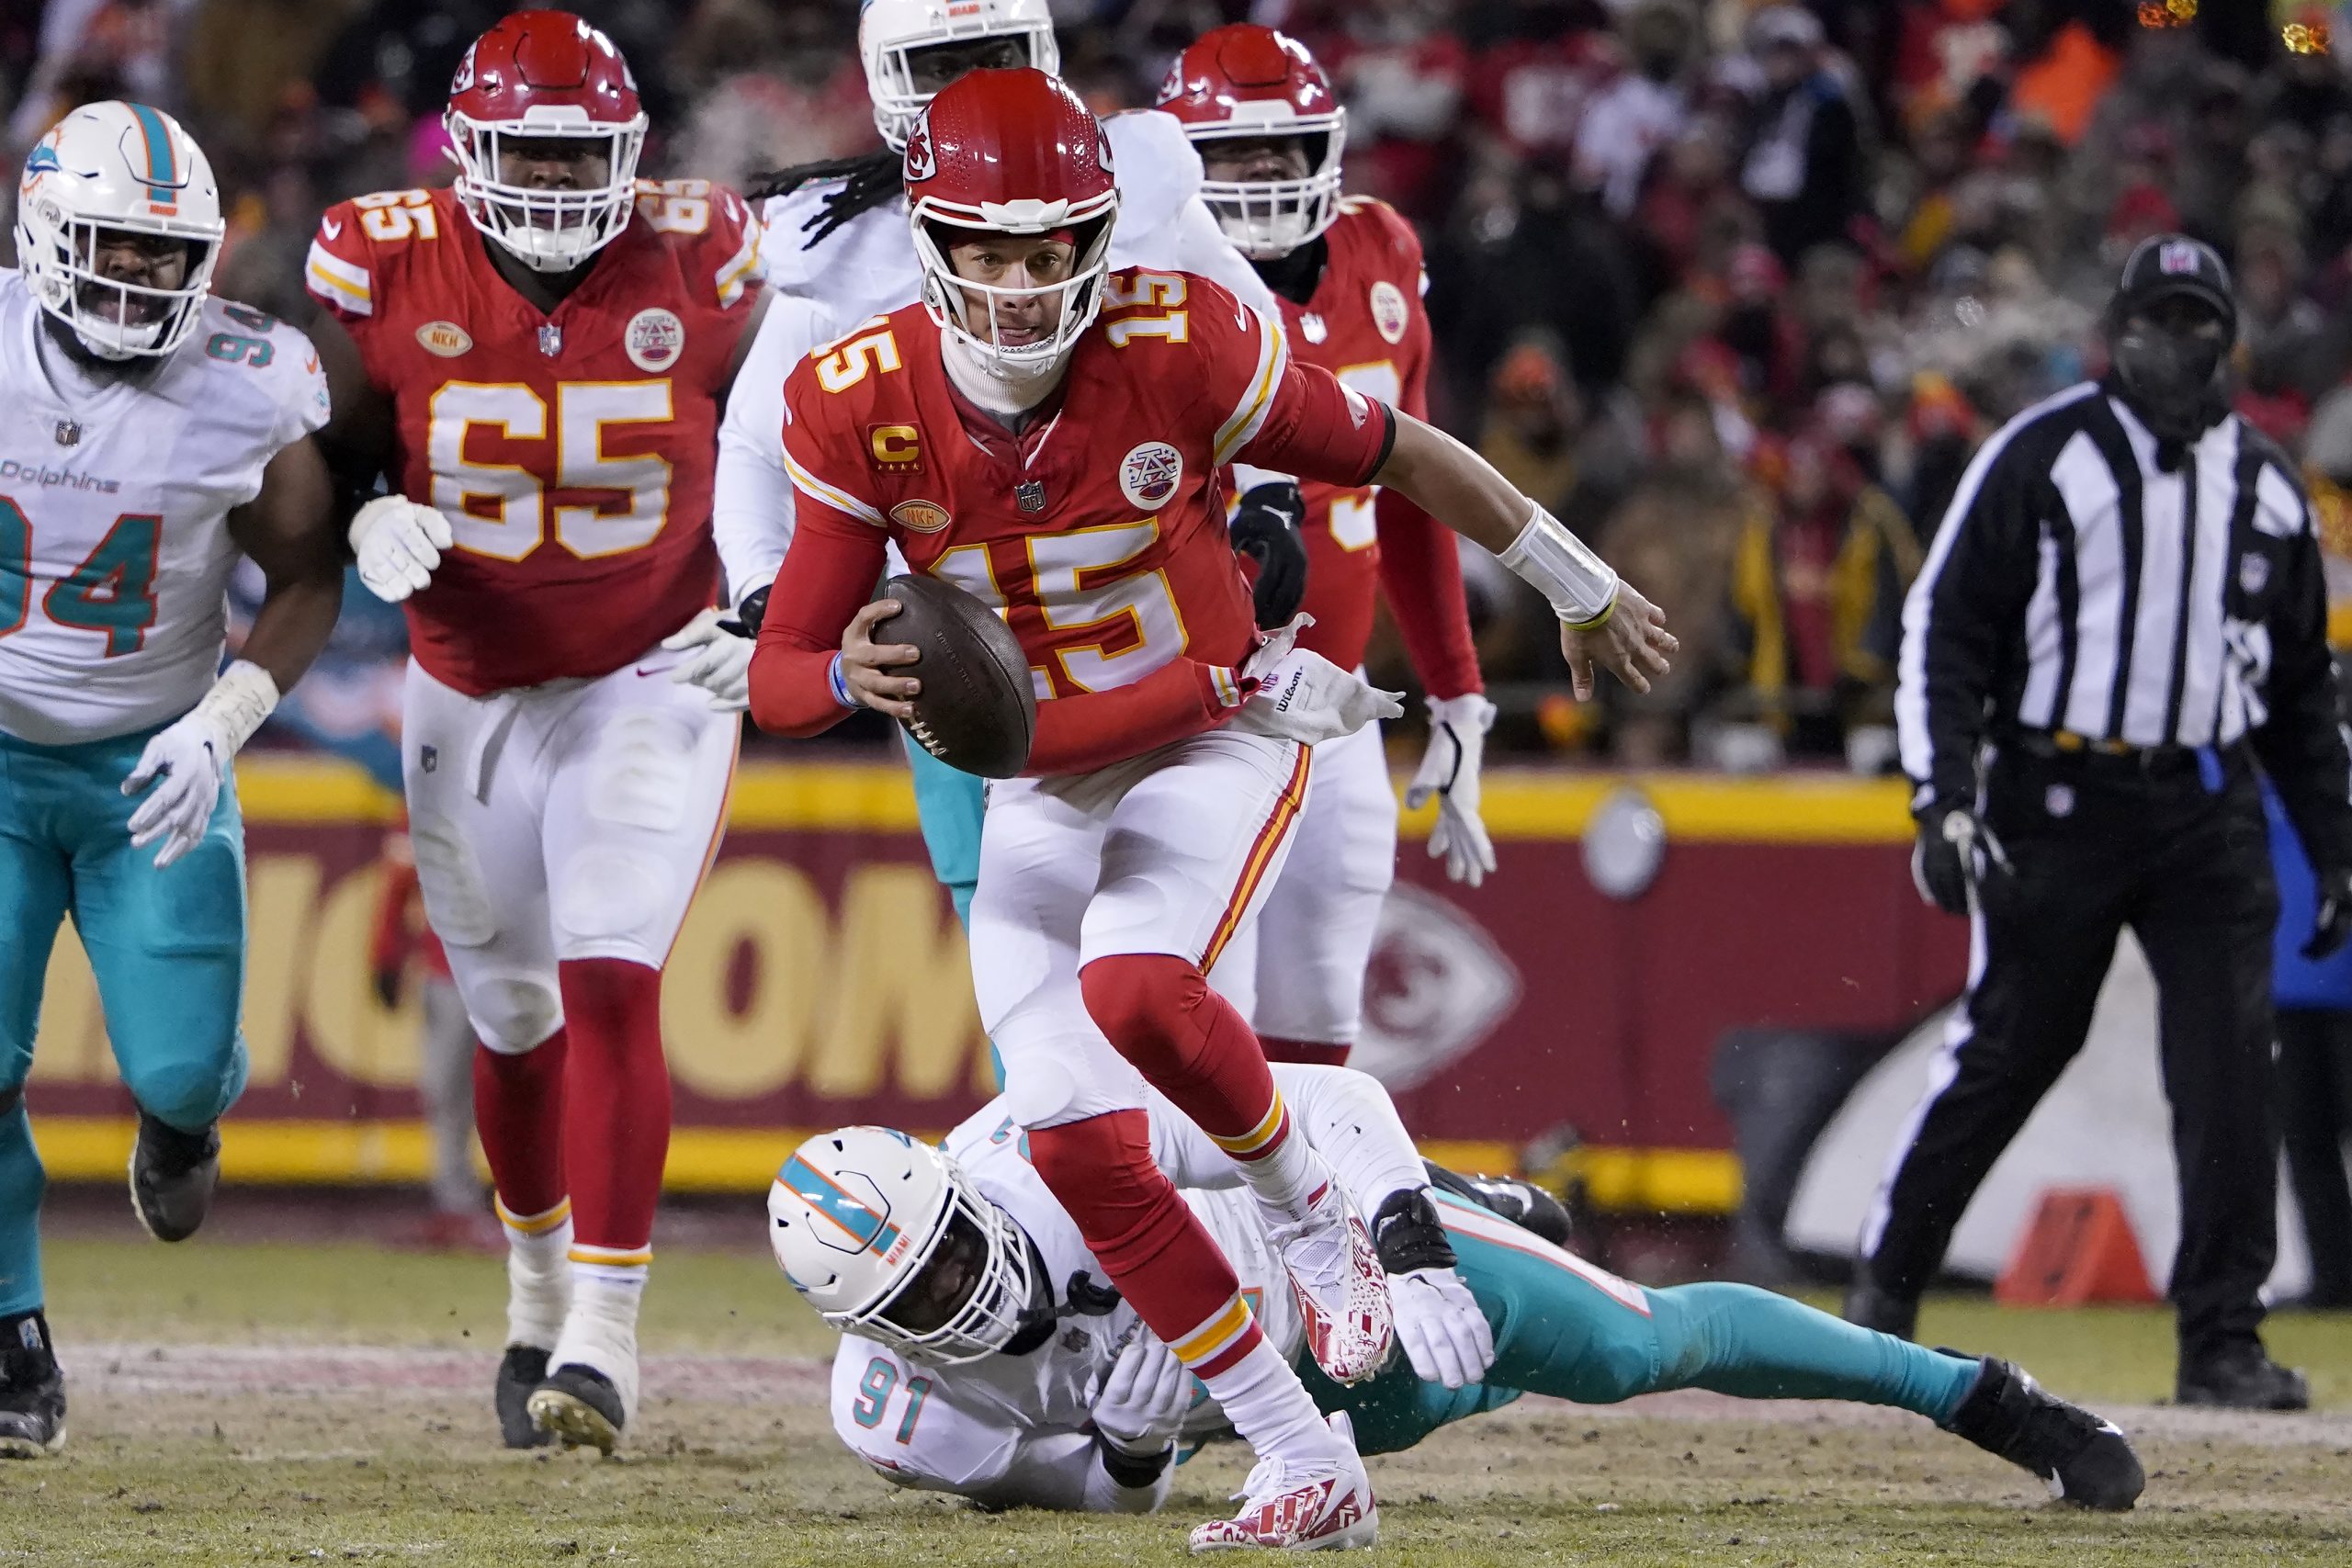 Patrick Mahomes leads Chiefs to 26-7 playoff win over Dolphins in  near-record low temps – NewsNation